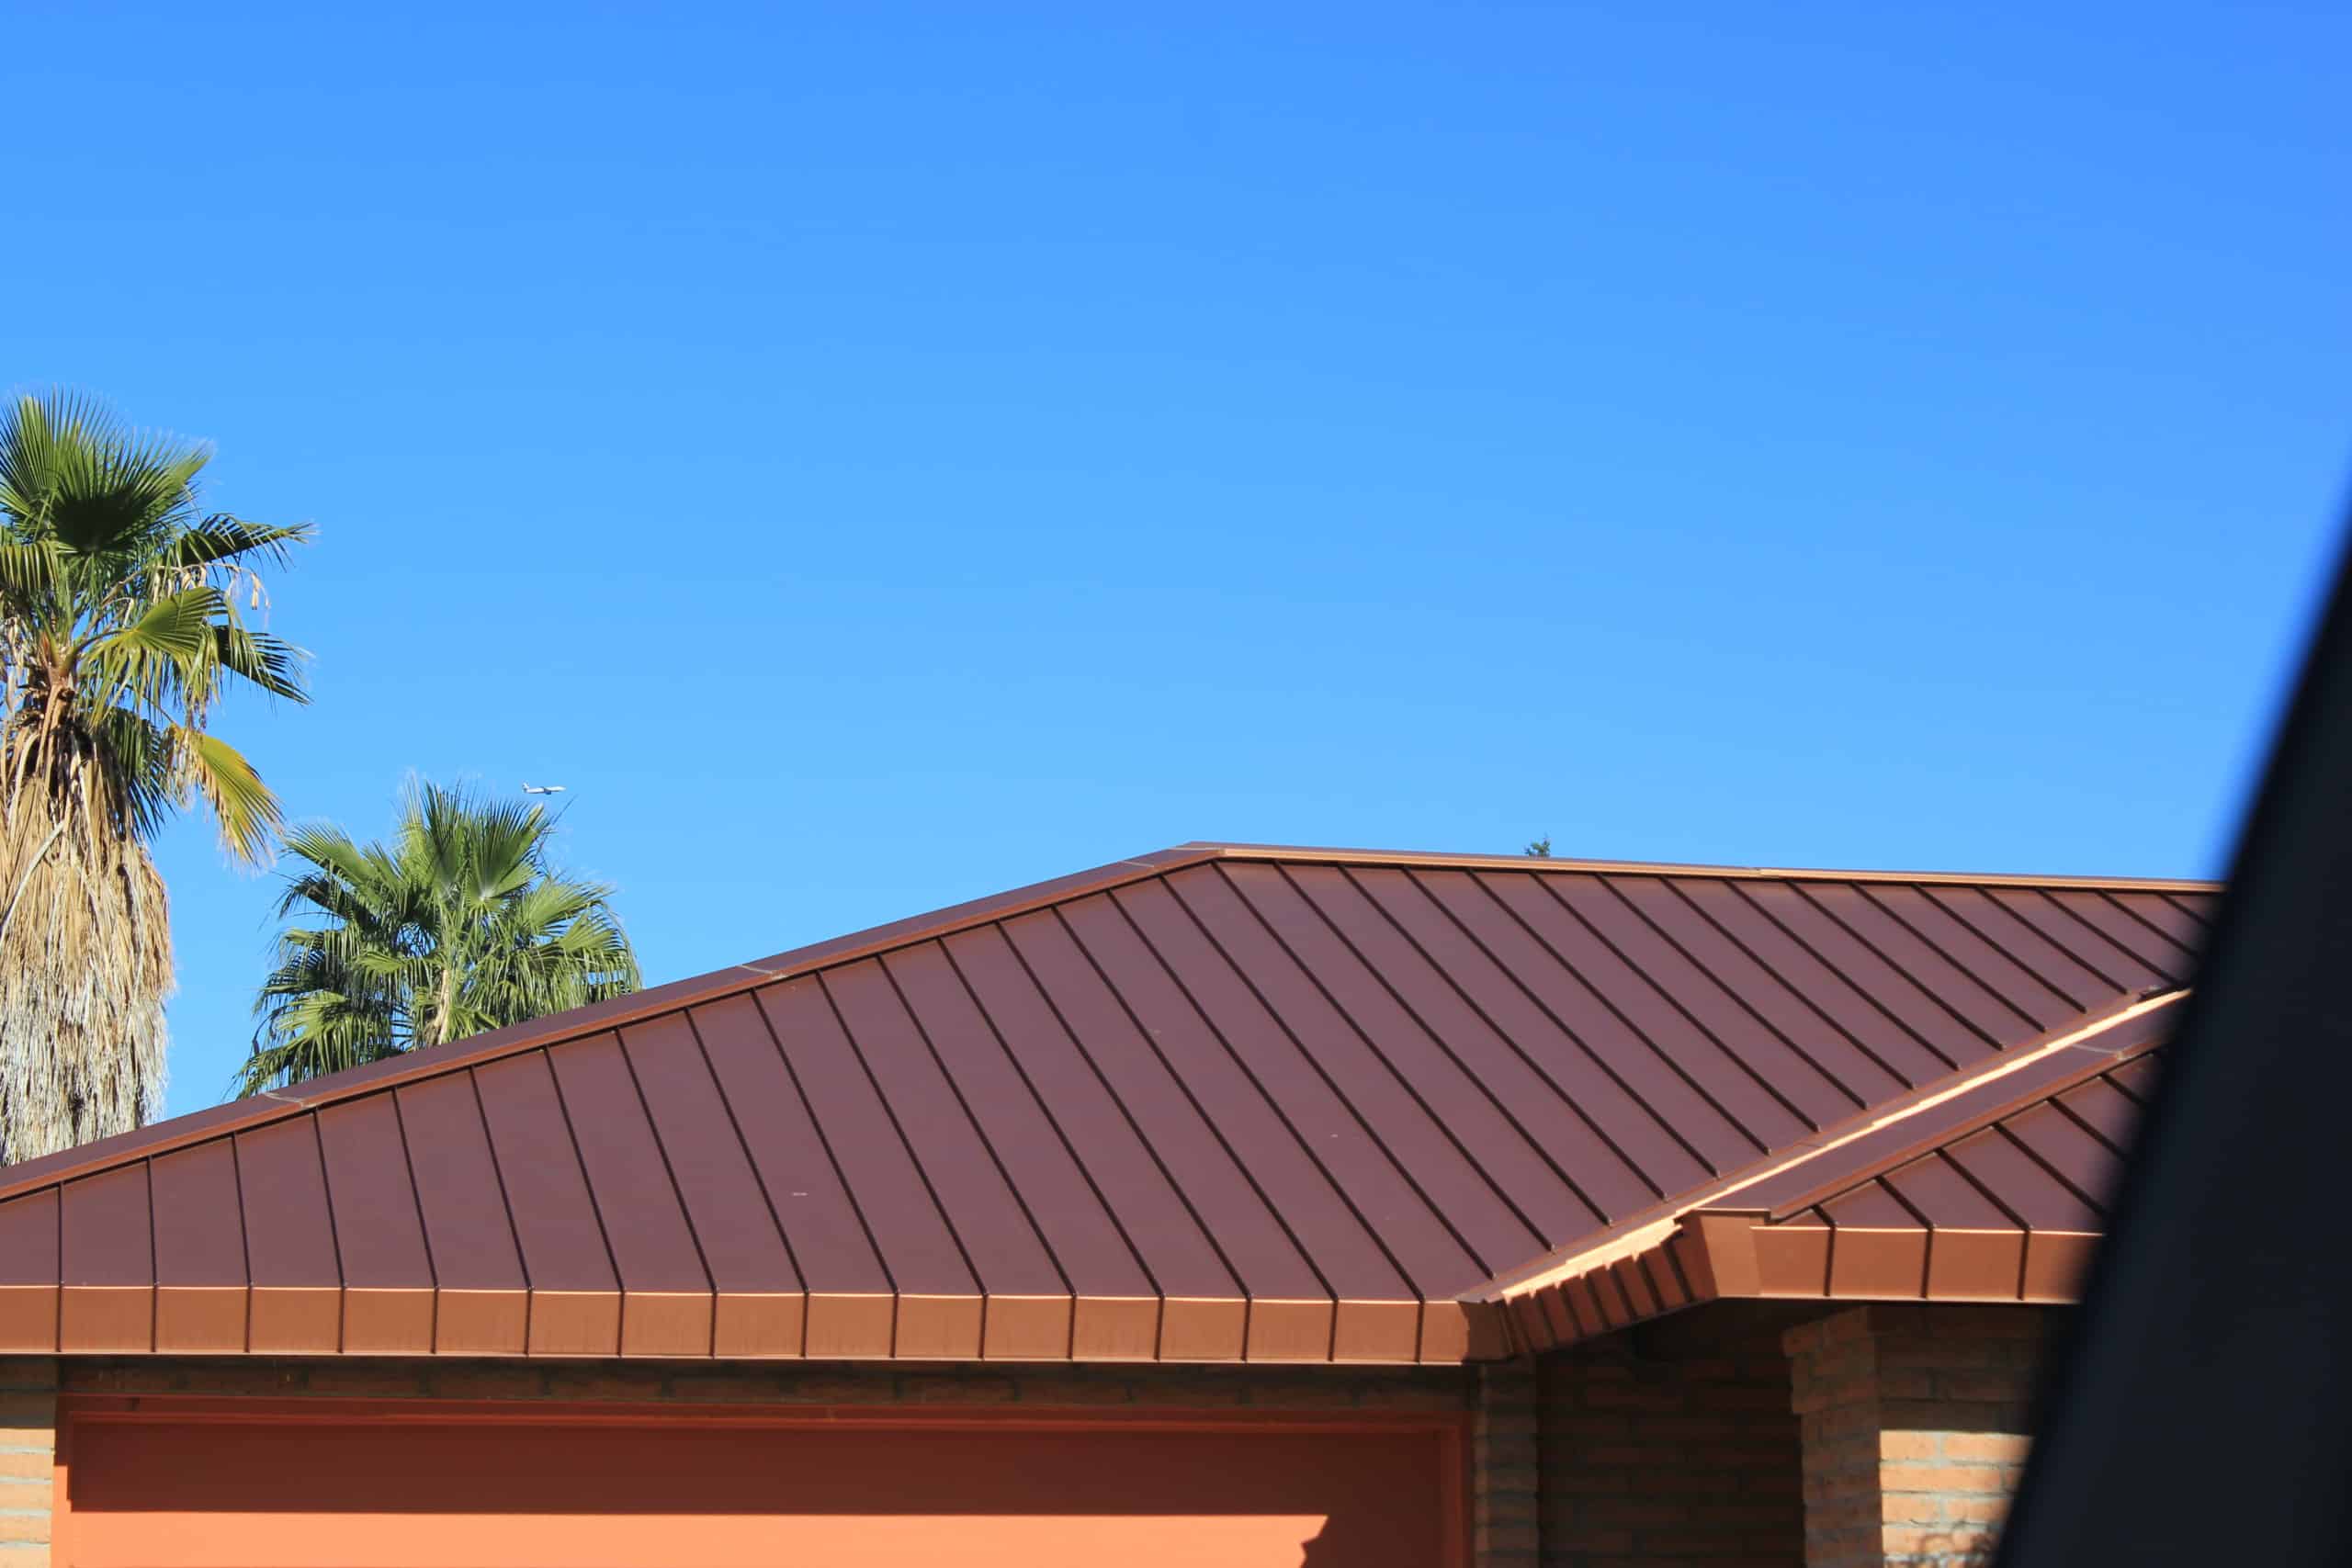 Commercial Standing Seam Metal Roof